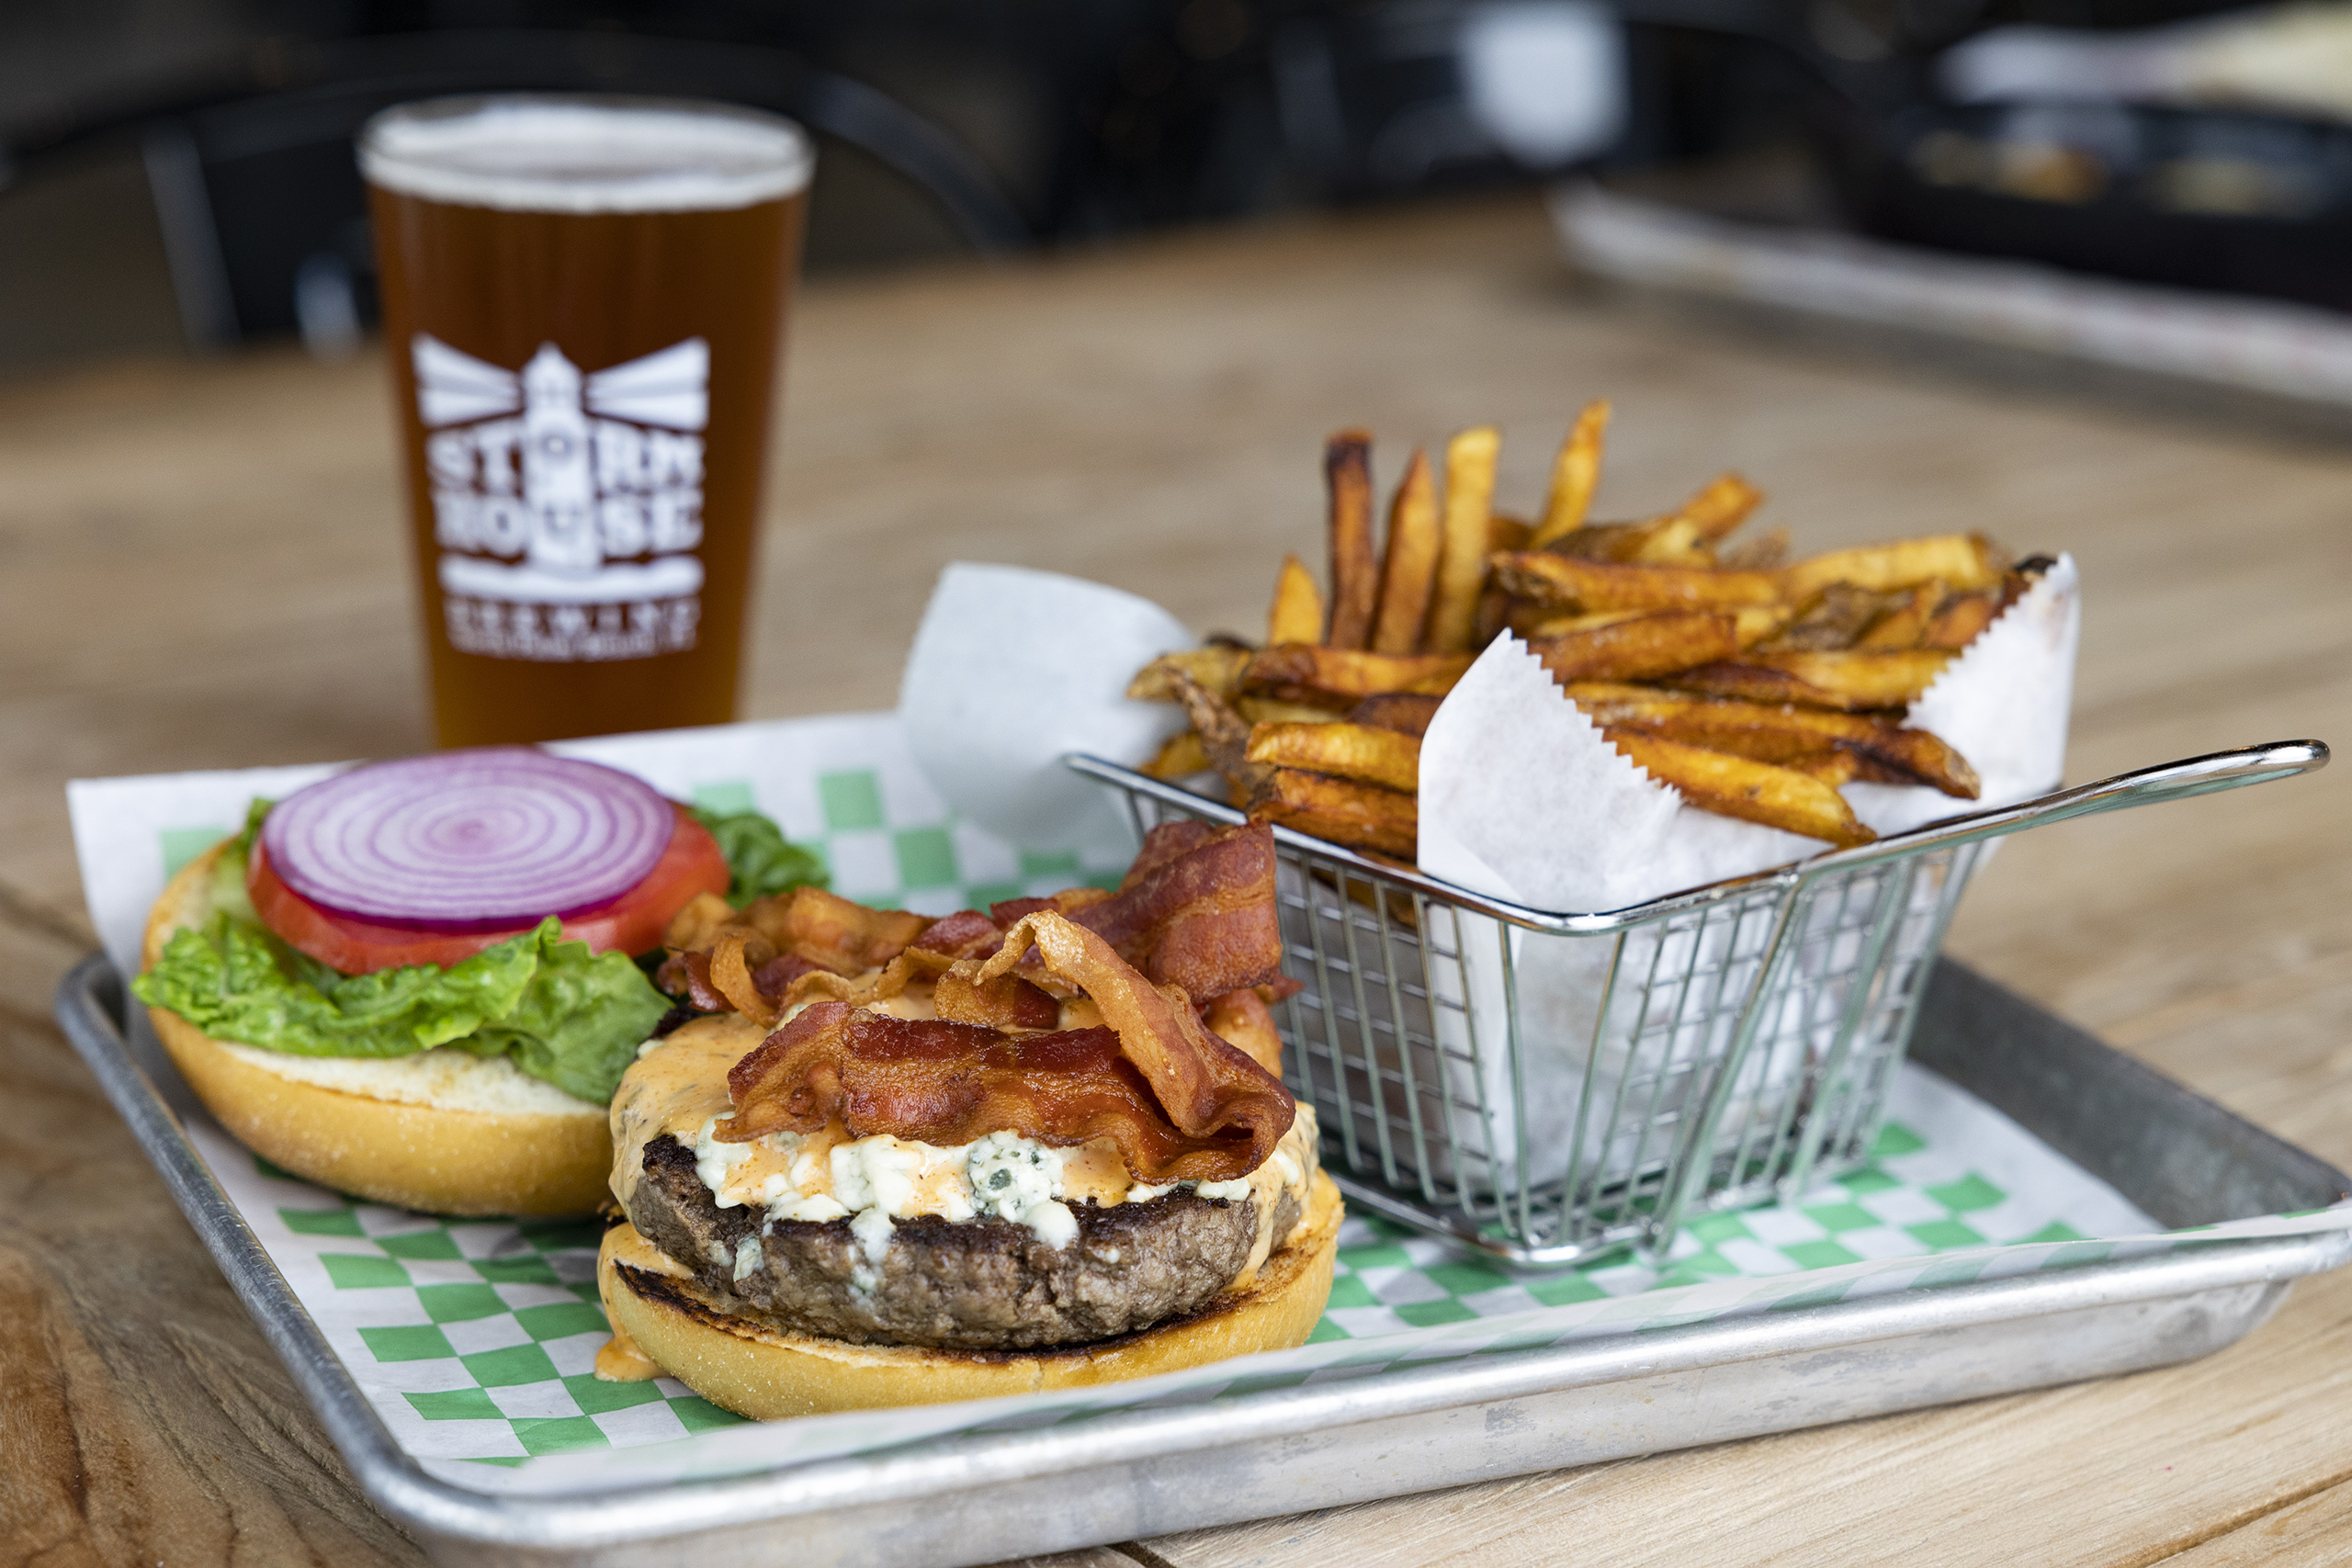 Bacon Cheese burger on a metal tray with fried and a pint of beer. Menu item at Stormhouse brewing in North Palm Beach, FL.